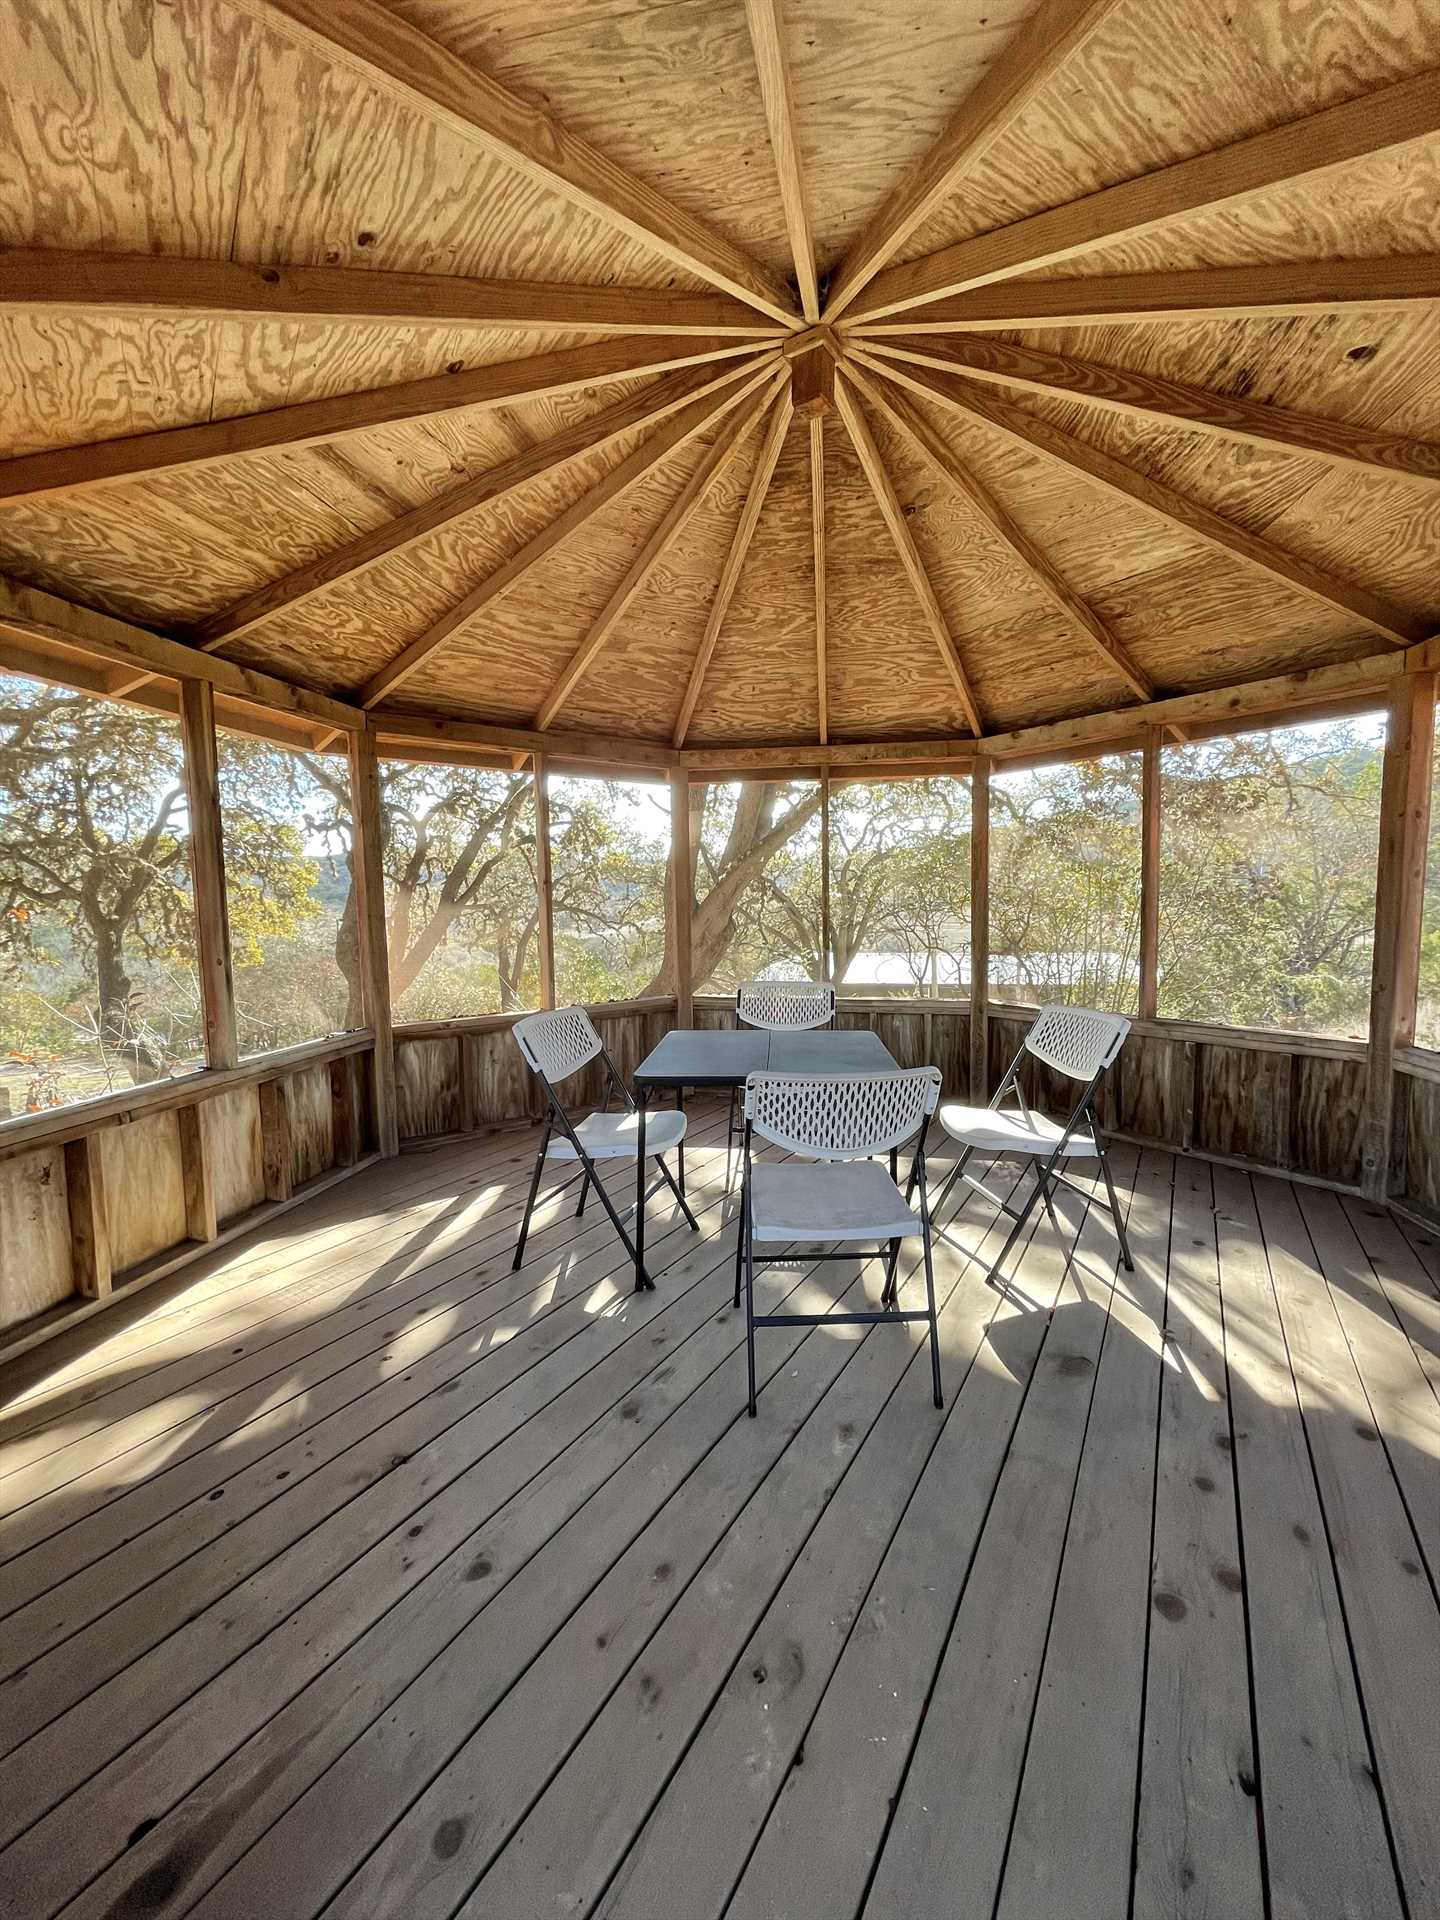                                                 The shaded cover of the gazebo offers 360 degrees of Hill Country views.